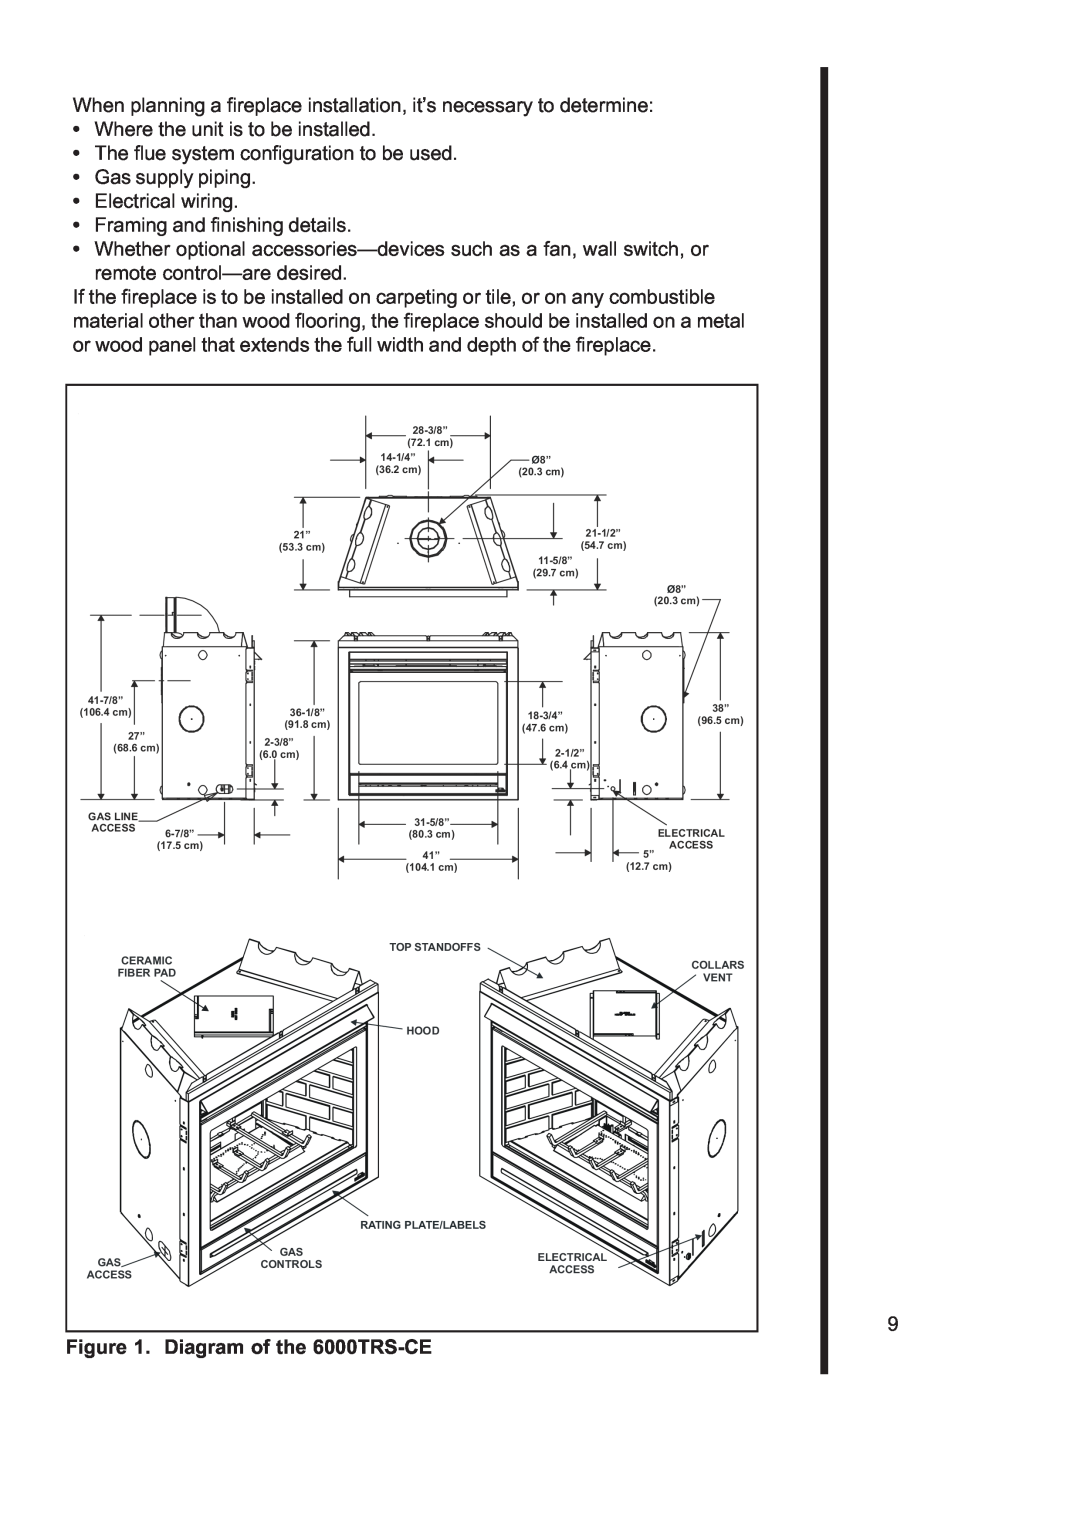 Heat & Glo LifeStyle 6000TRS-CD manual Diagram of the 6000TRS-CE 